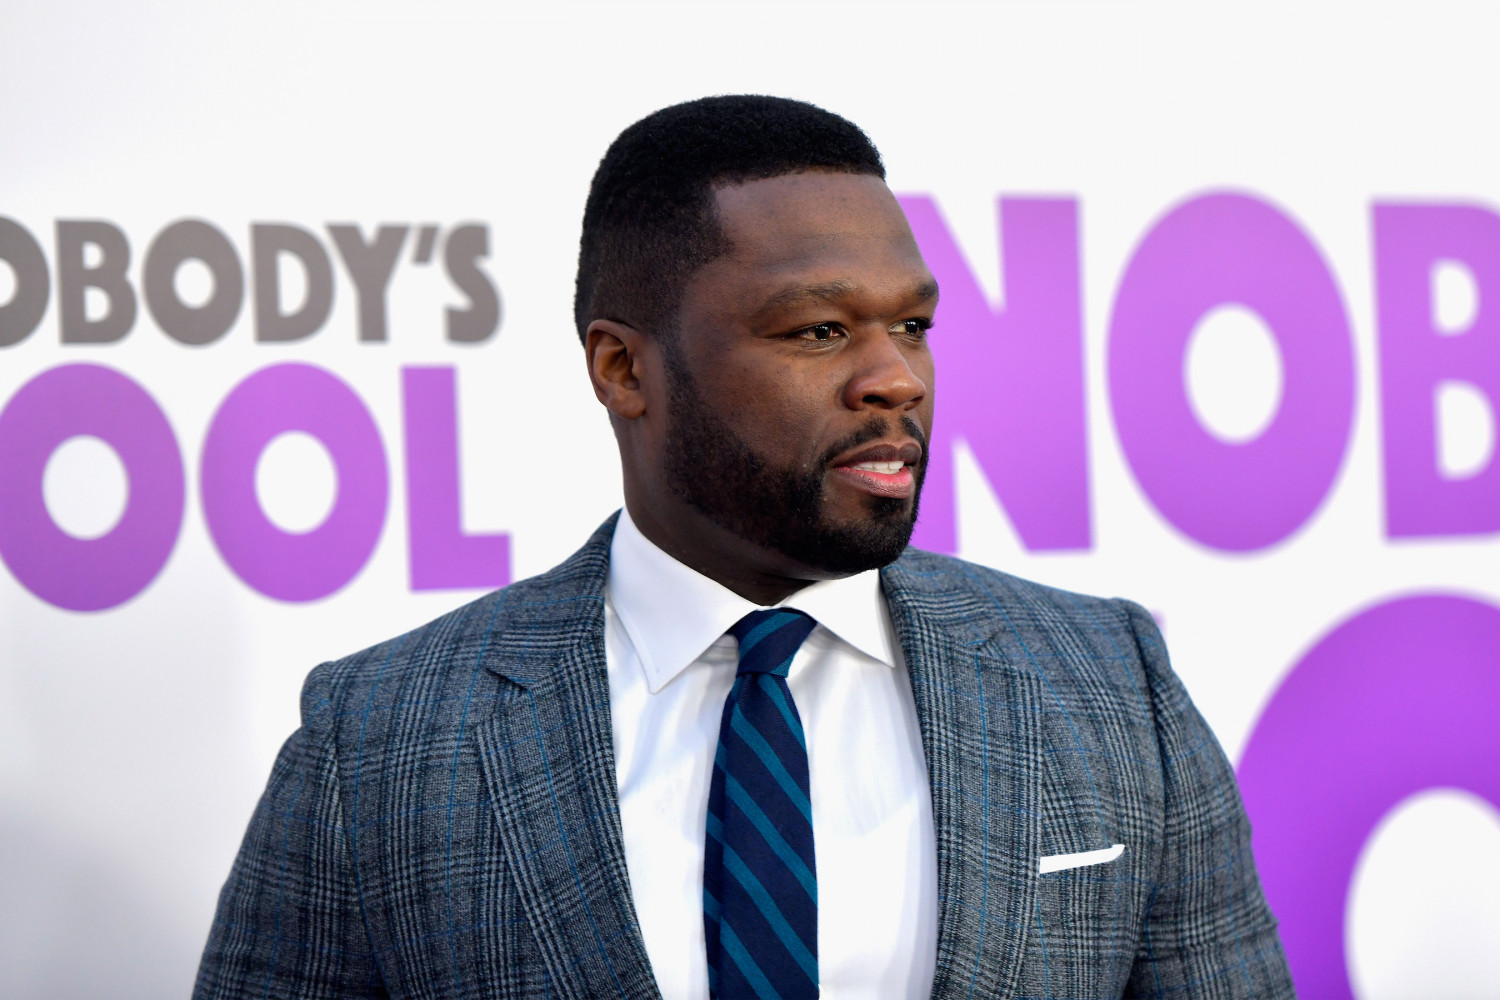 50 Cent Sells Mansion at Massive 84 Percent Discount After 12 Years: Report